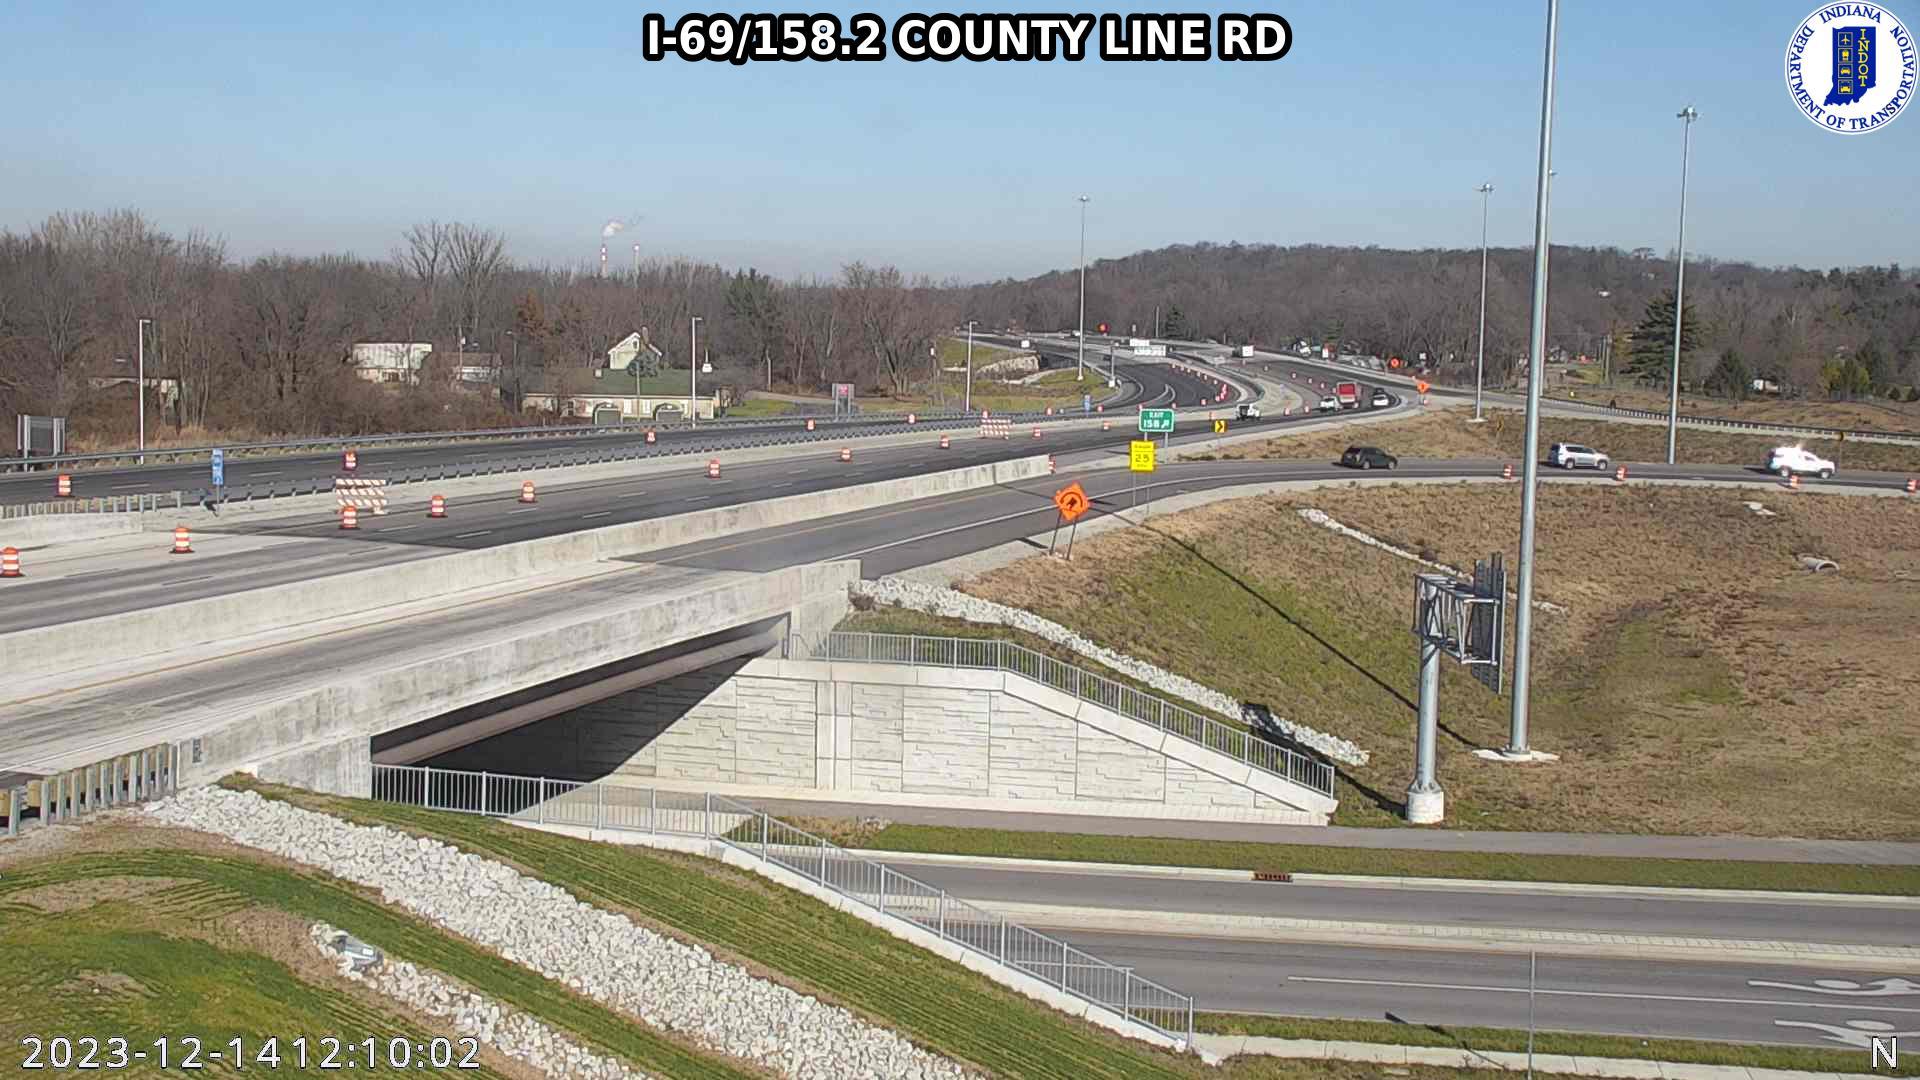 Traffic Cam Indianapolis: I-69: I-69/158.2 COUNTY LINE RD: I-69/158.2 COUNTY LINE RD Player